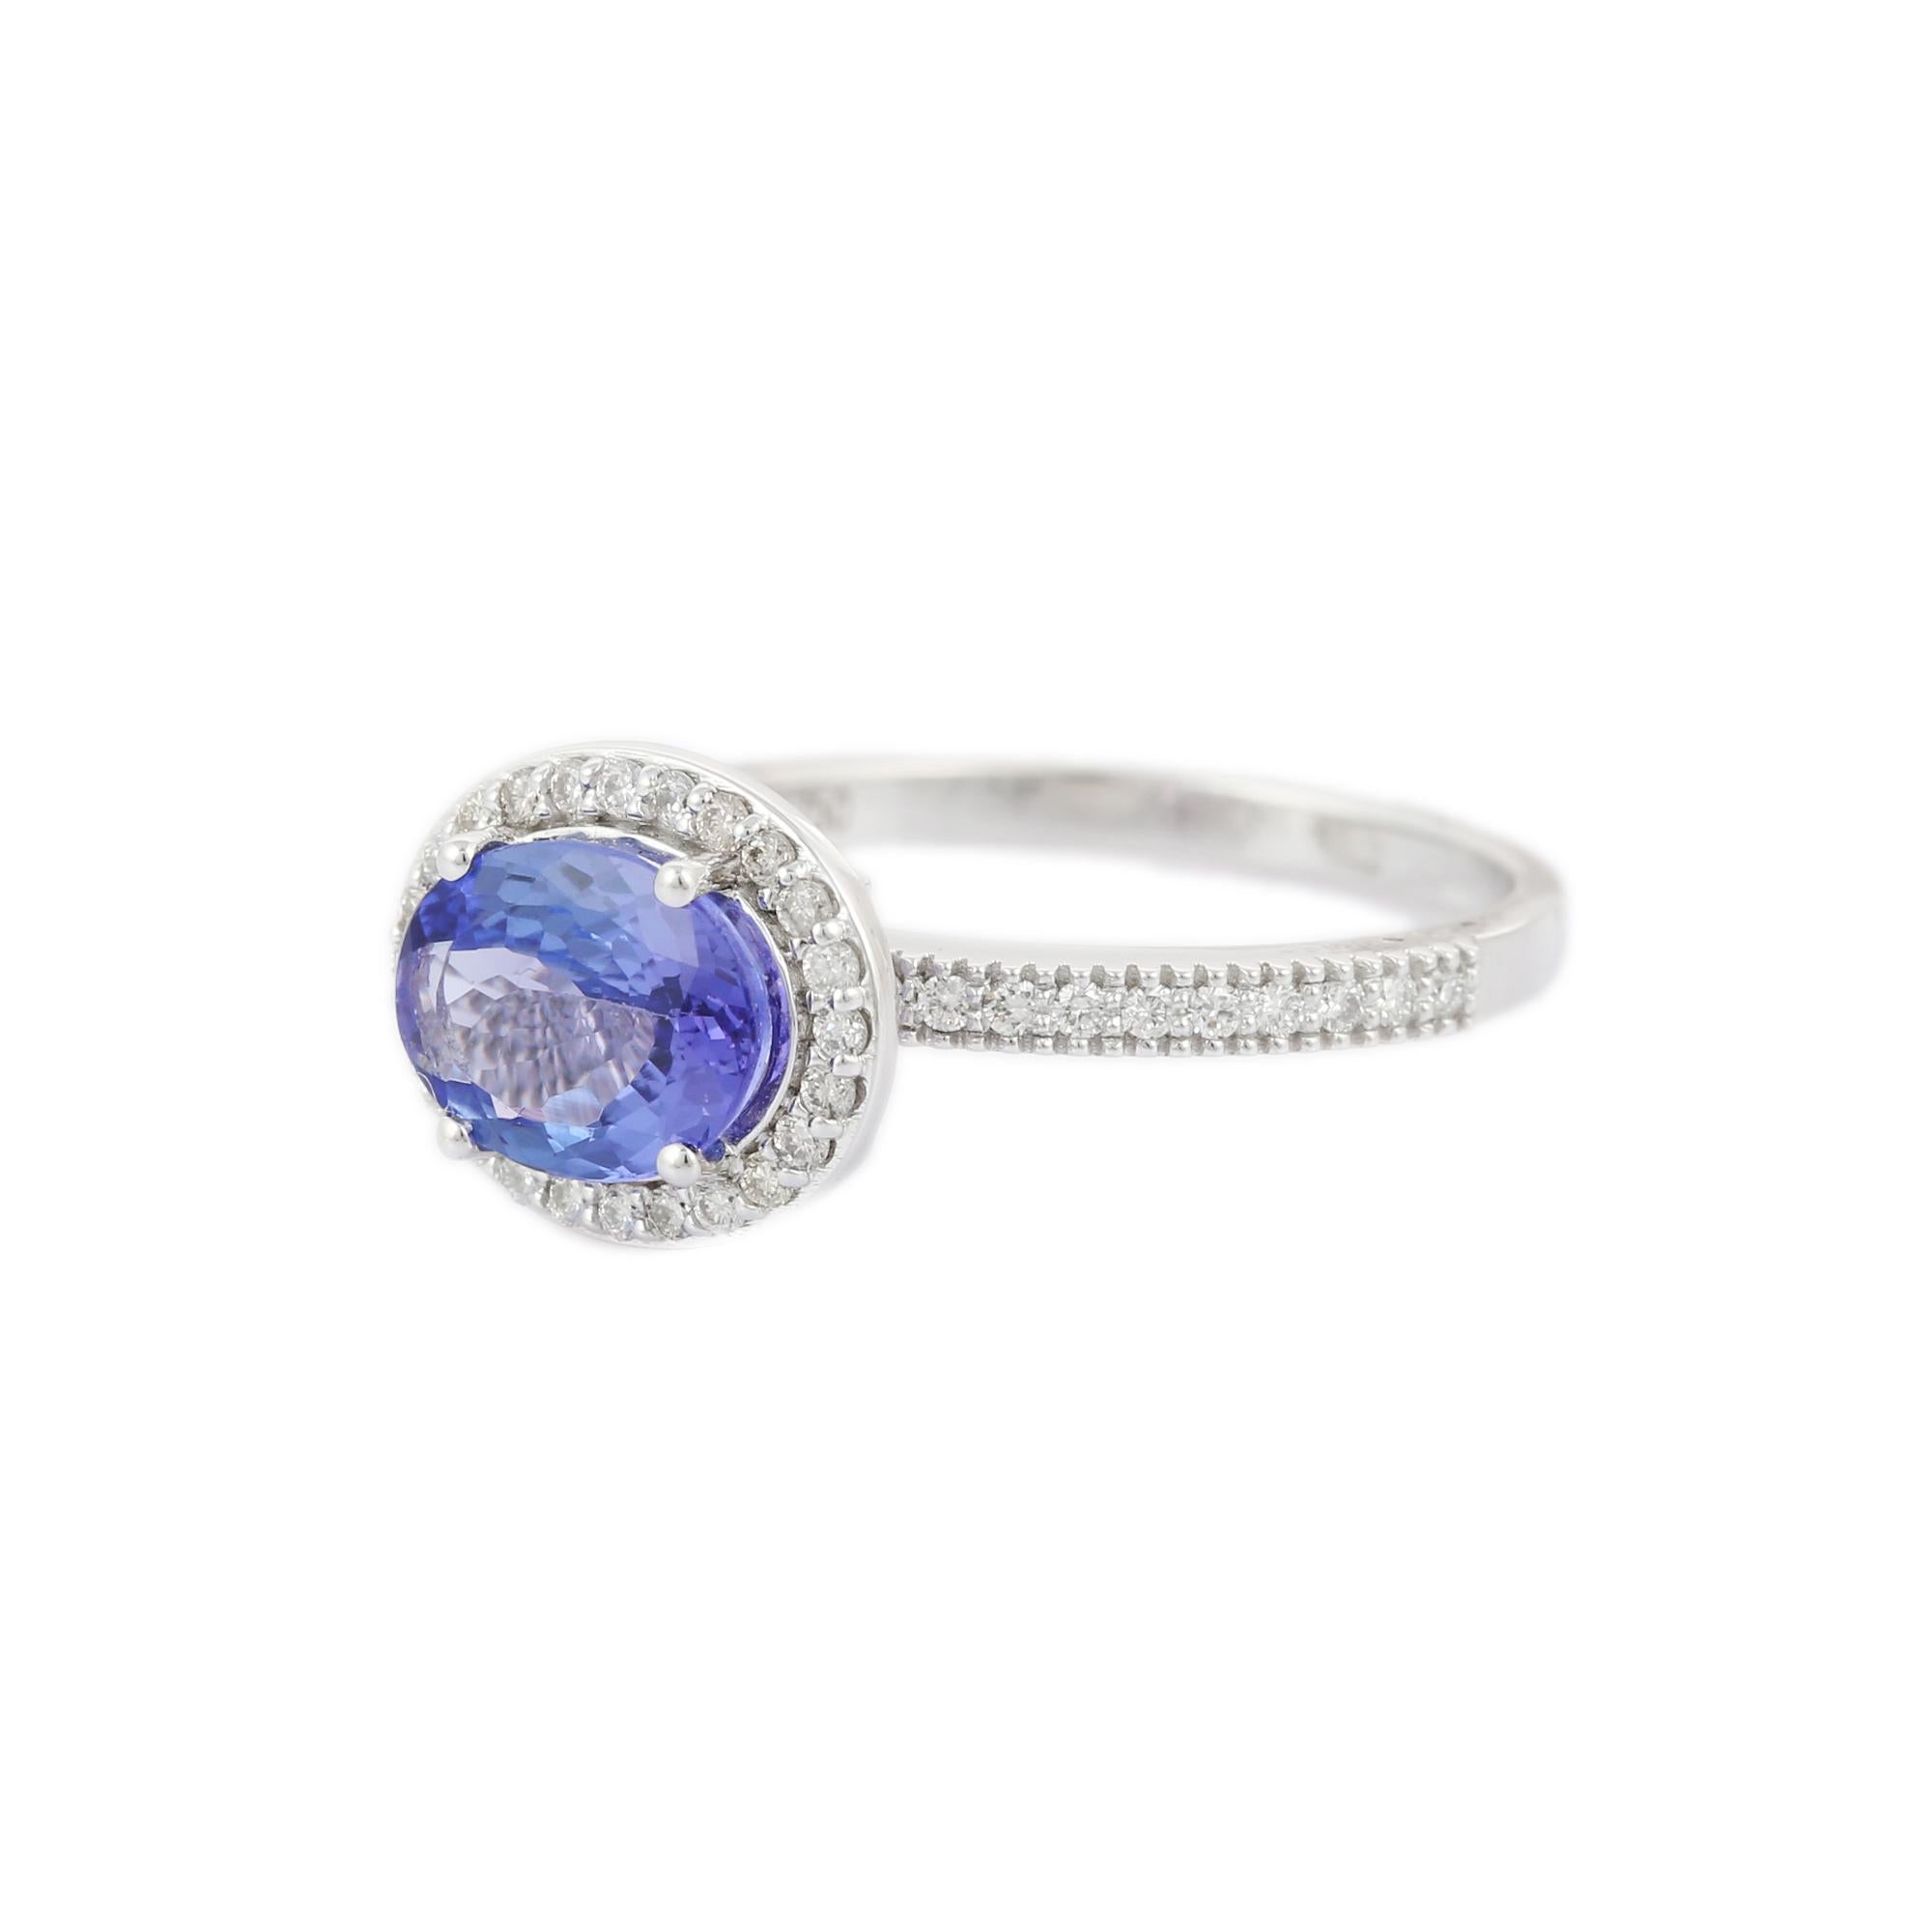 For Sale:  Oval Shaped Tanzanite and Diamond Ring in 18K White Gold 2